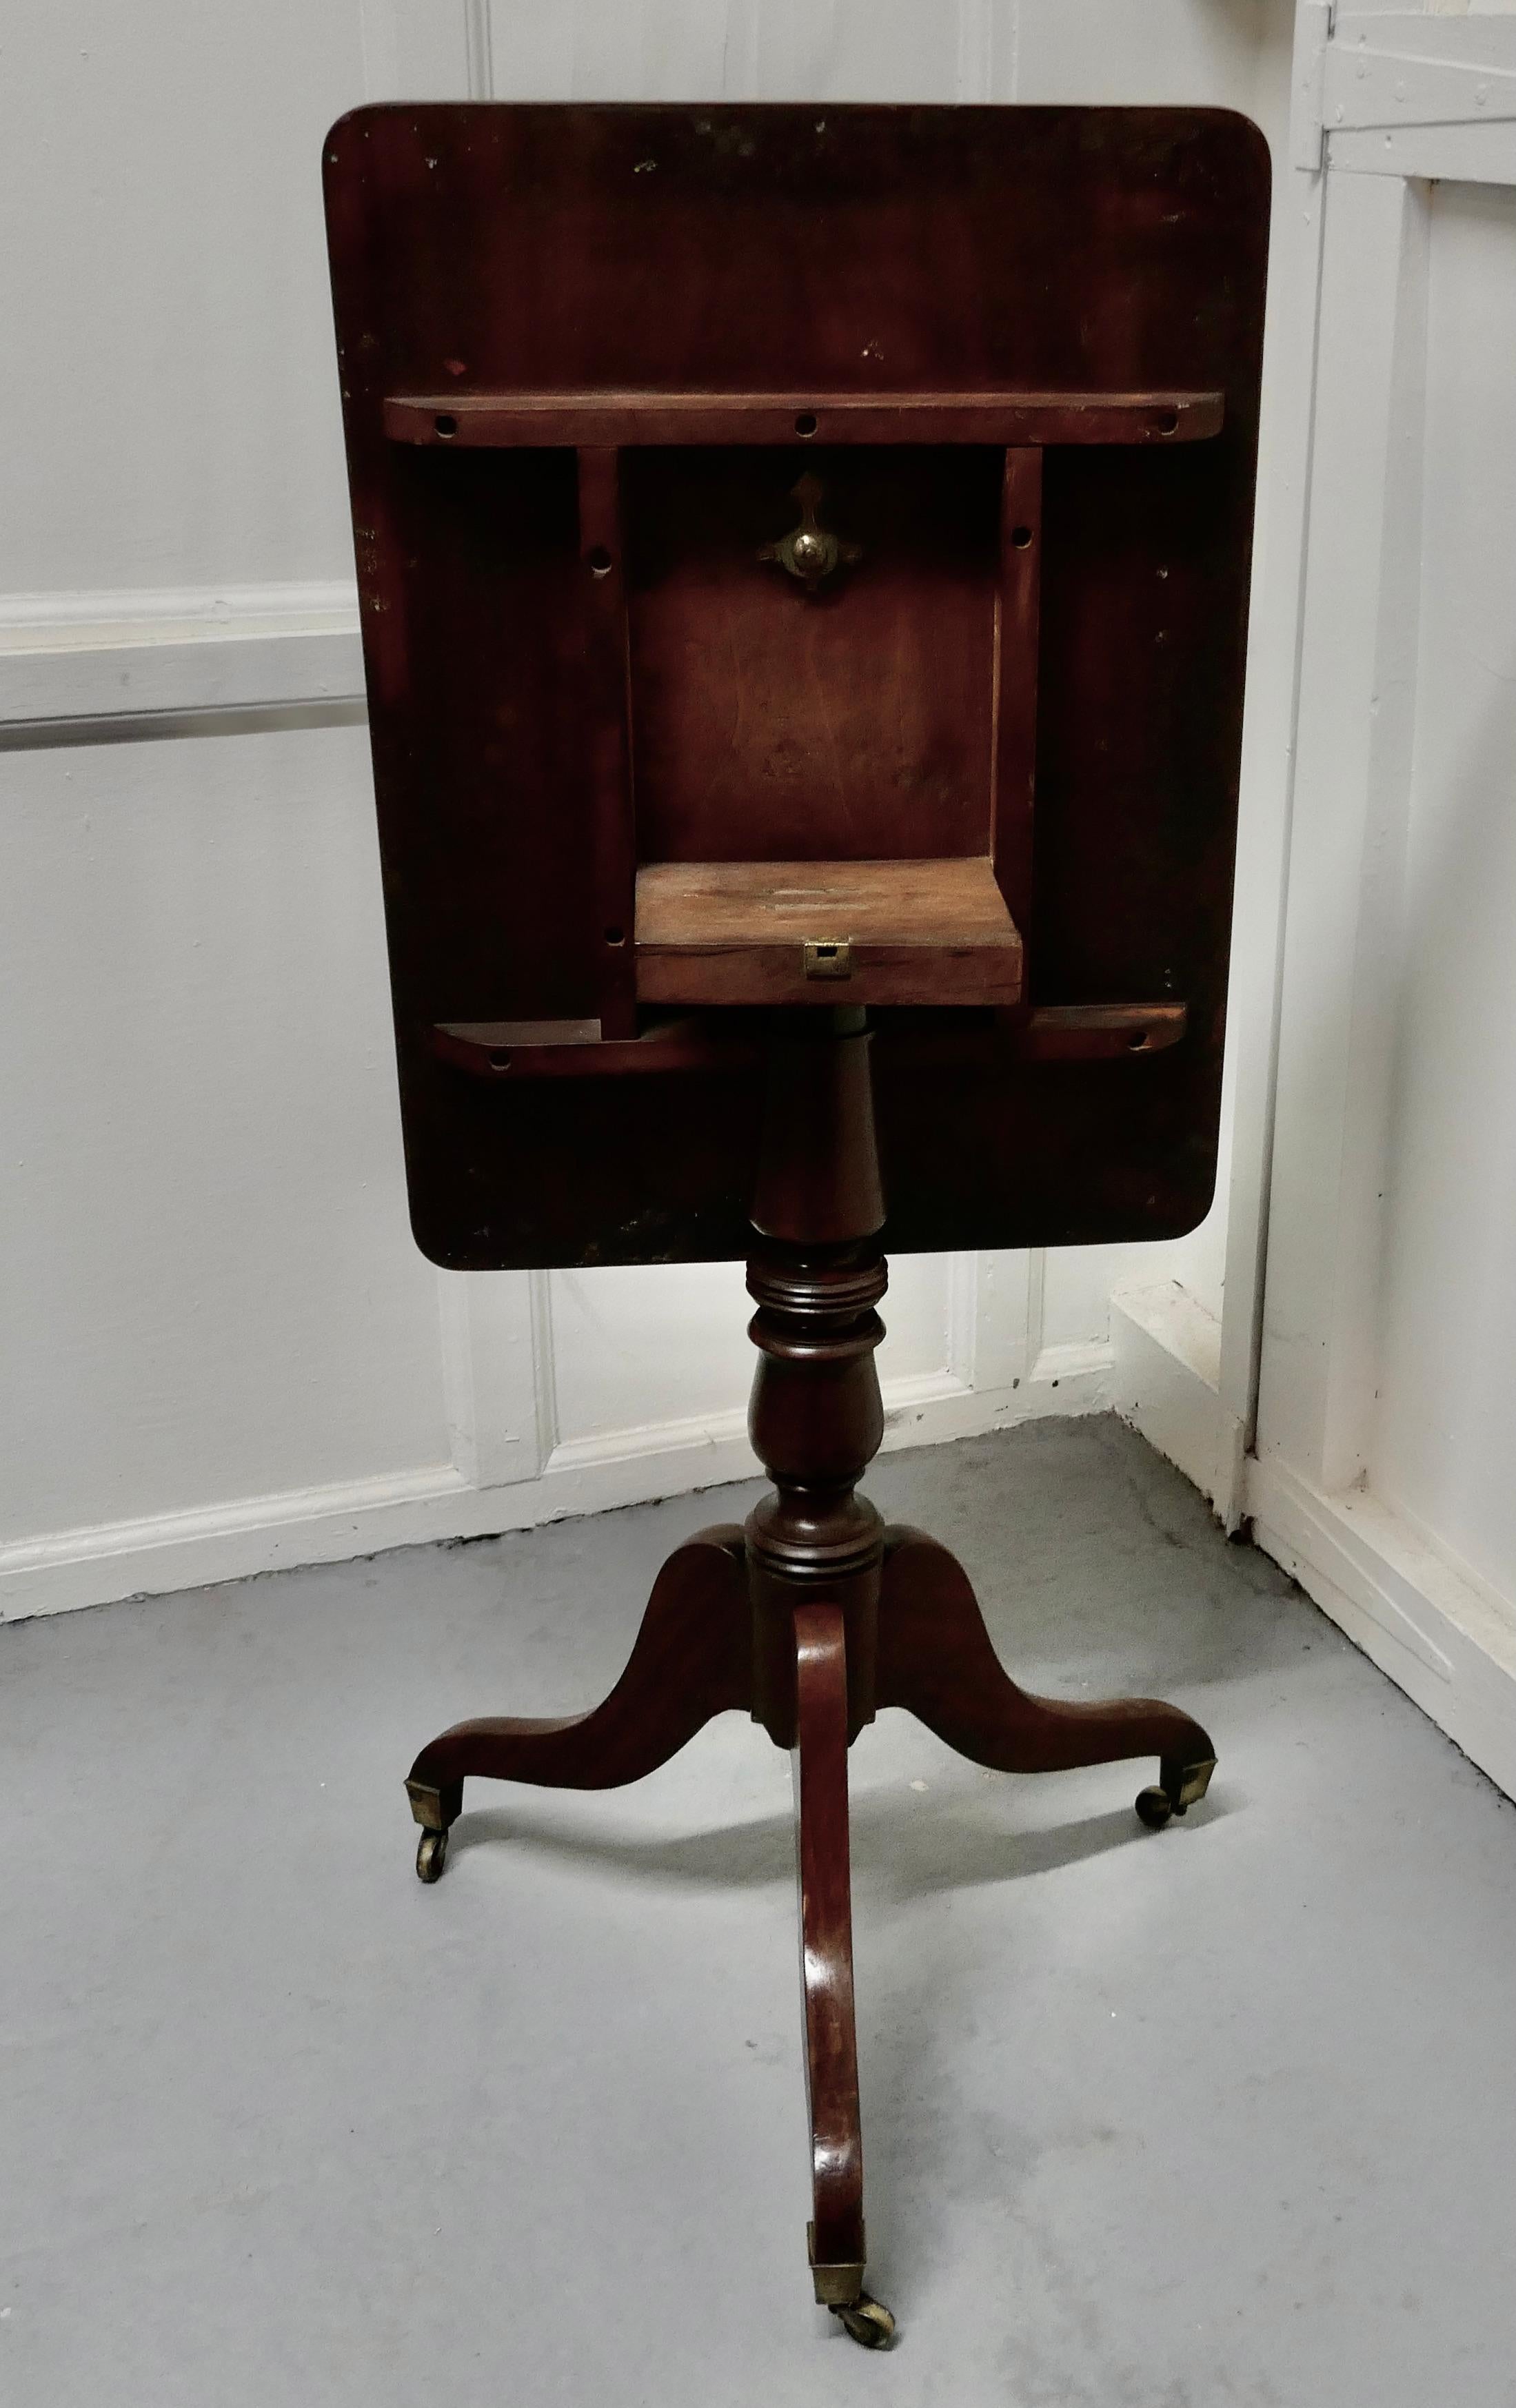 Georgian mahogany tilt-top wine table

This lovely table it stands on a three footed base with brass casters and has a attractive turned centre leg
The 1 piece rectangular mahogany top tilts easily
The table is in good sound used condition, it